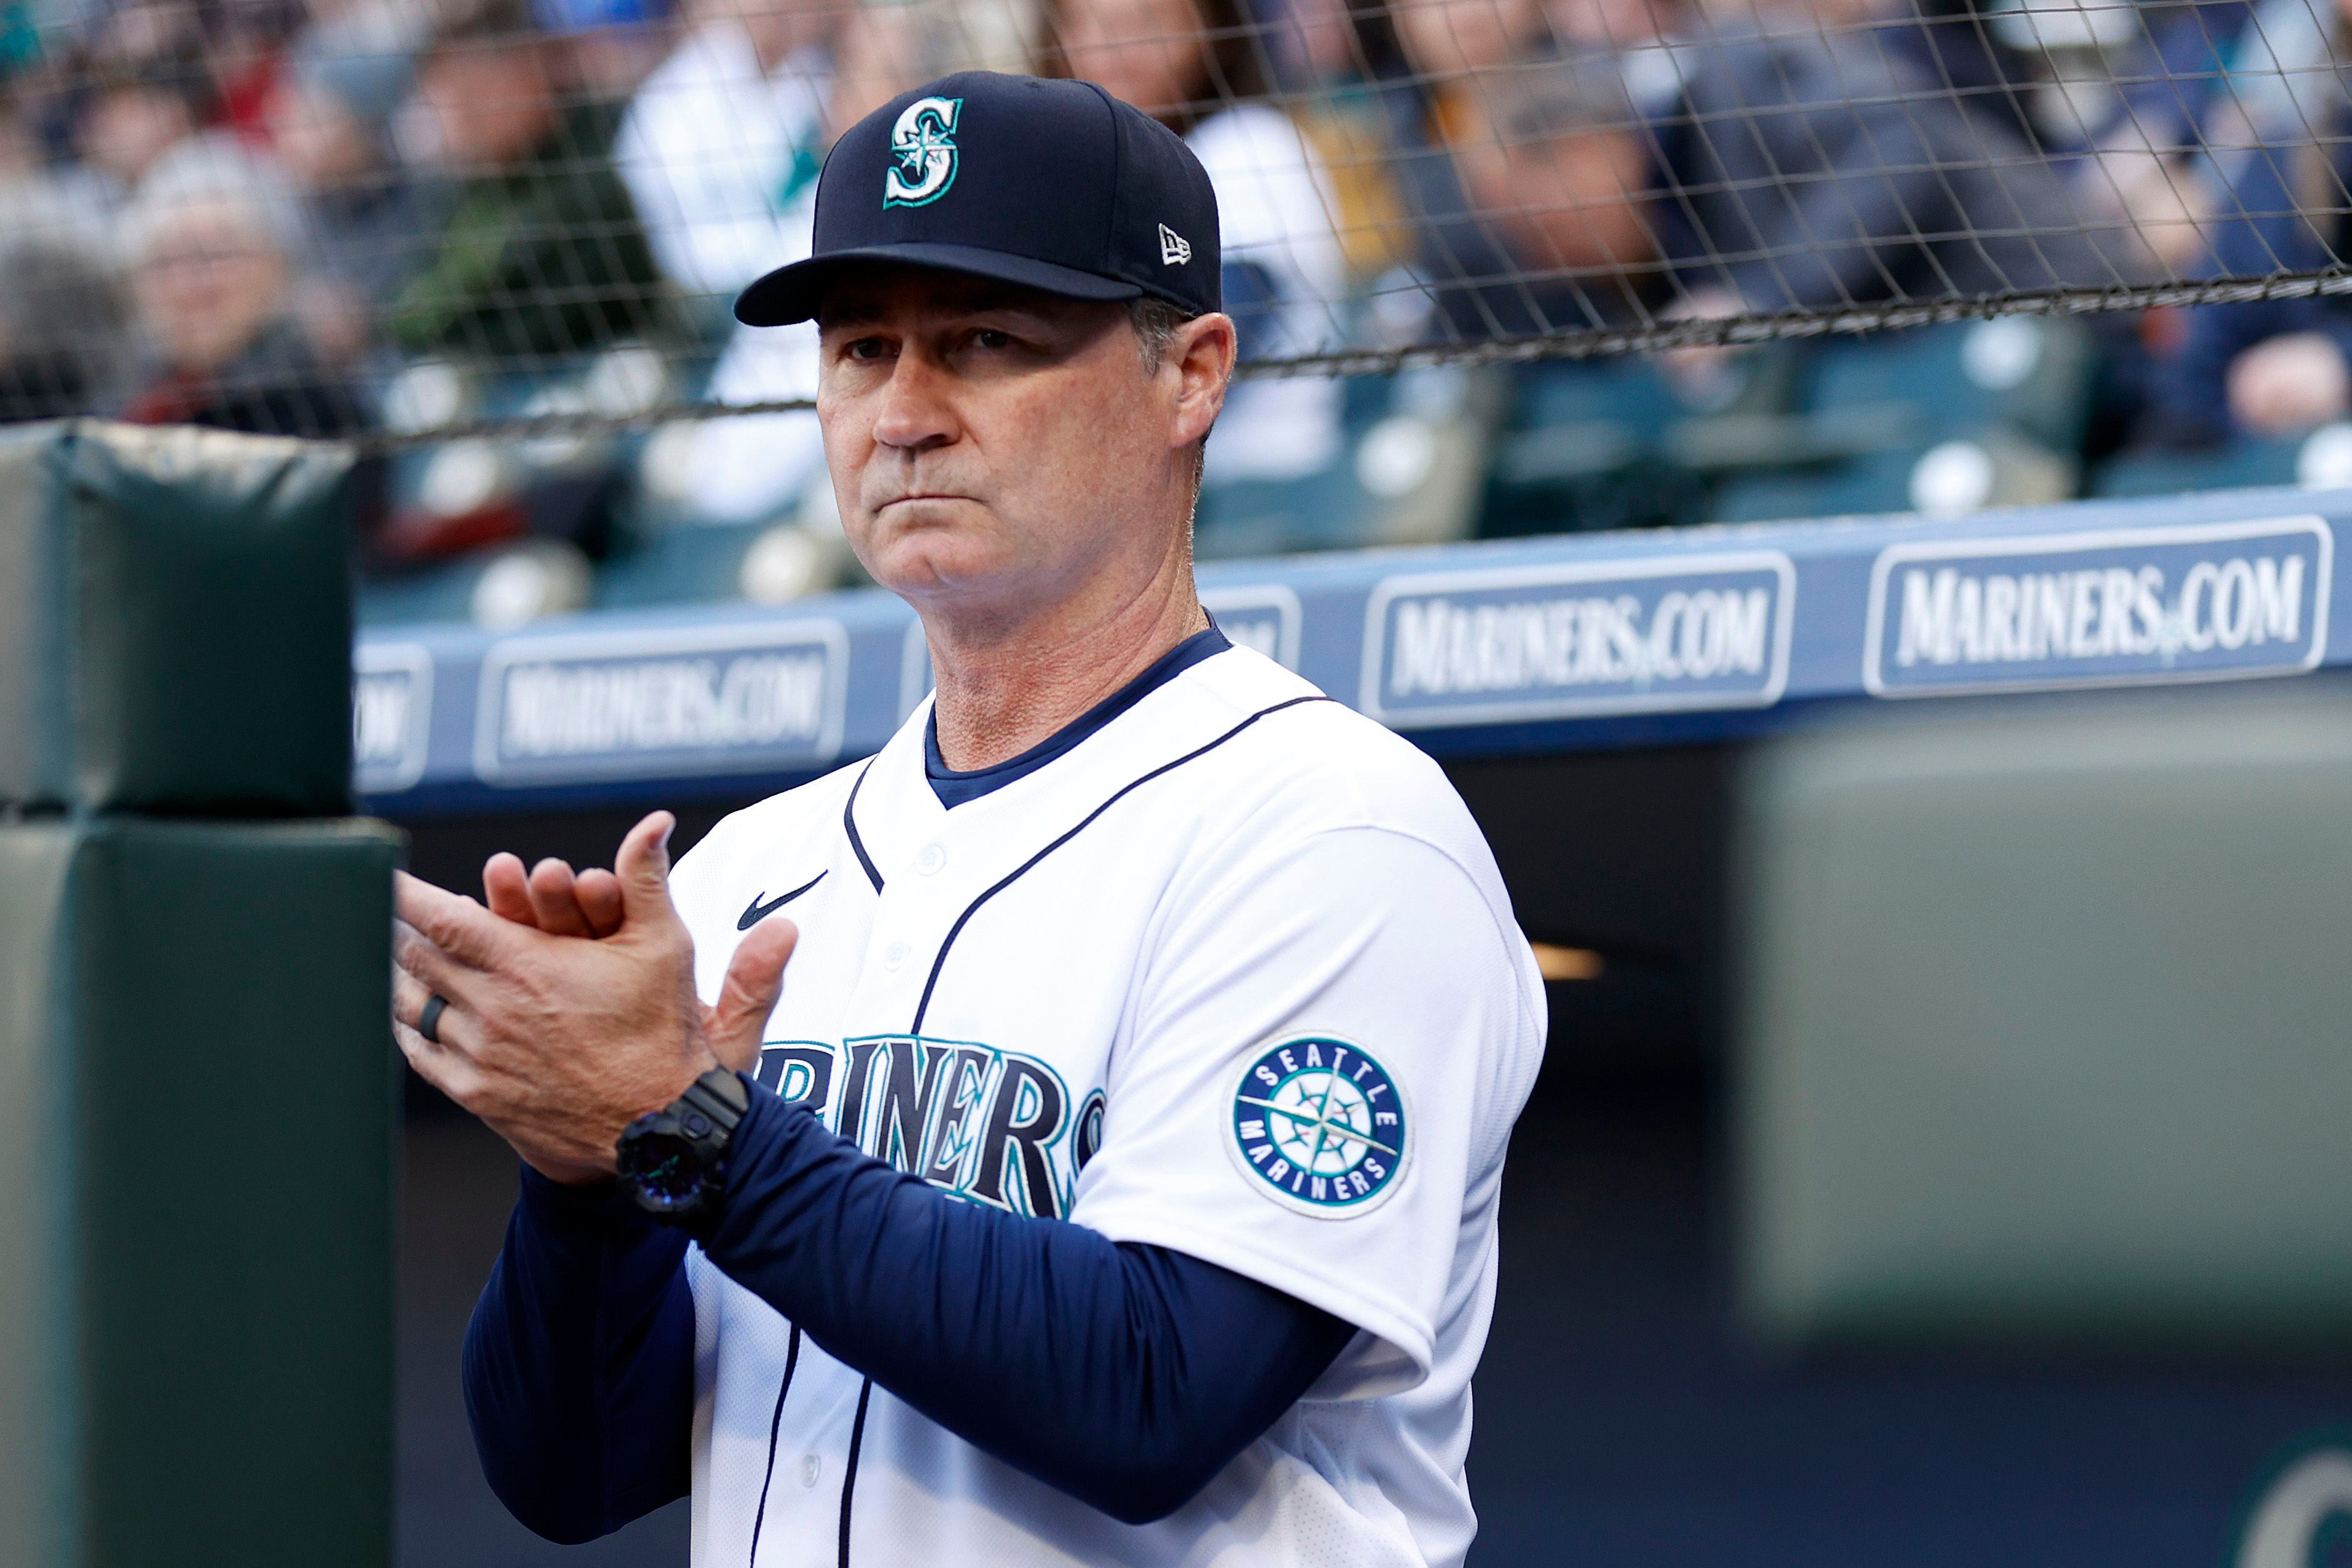 Mariners' manager Scott Servais out due to COVID-19 – KIRO 7 News Seattle